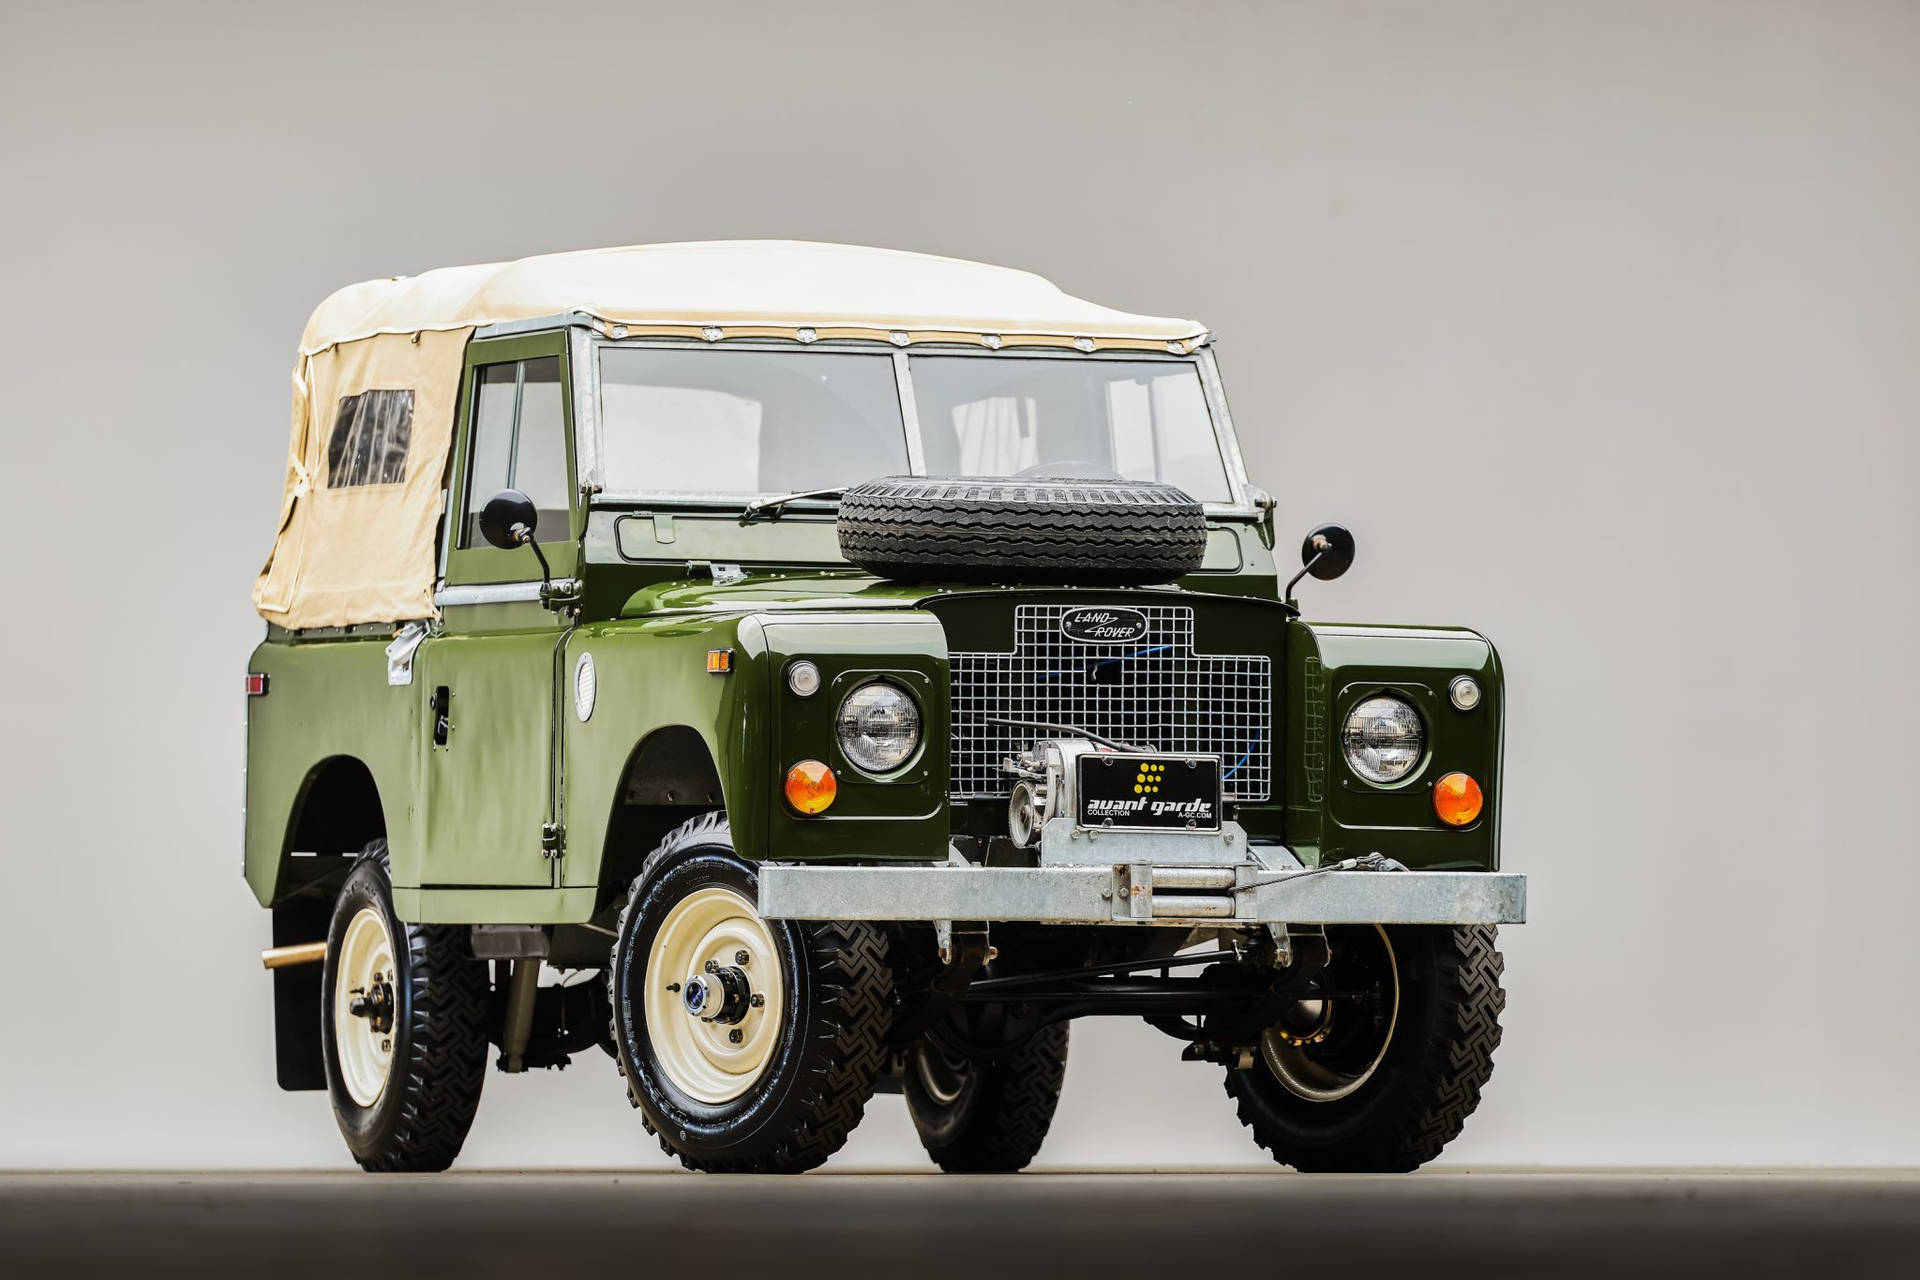 88 Series Land Rover Iphone